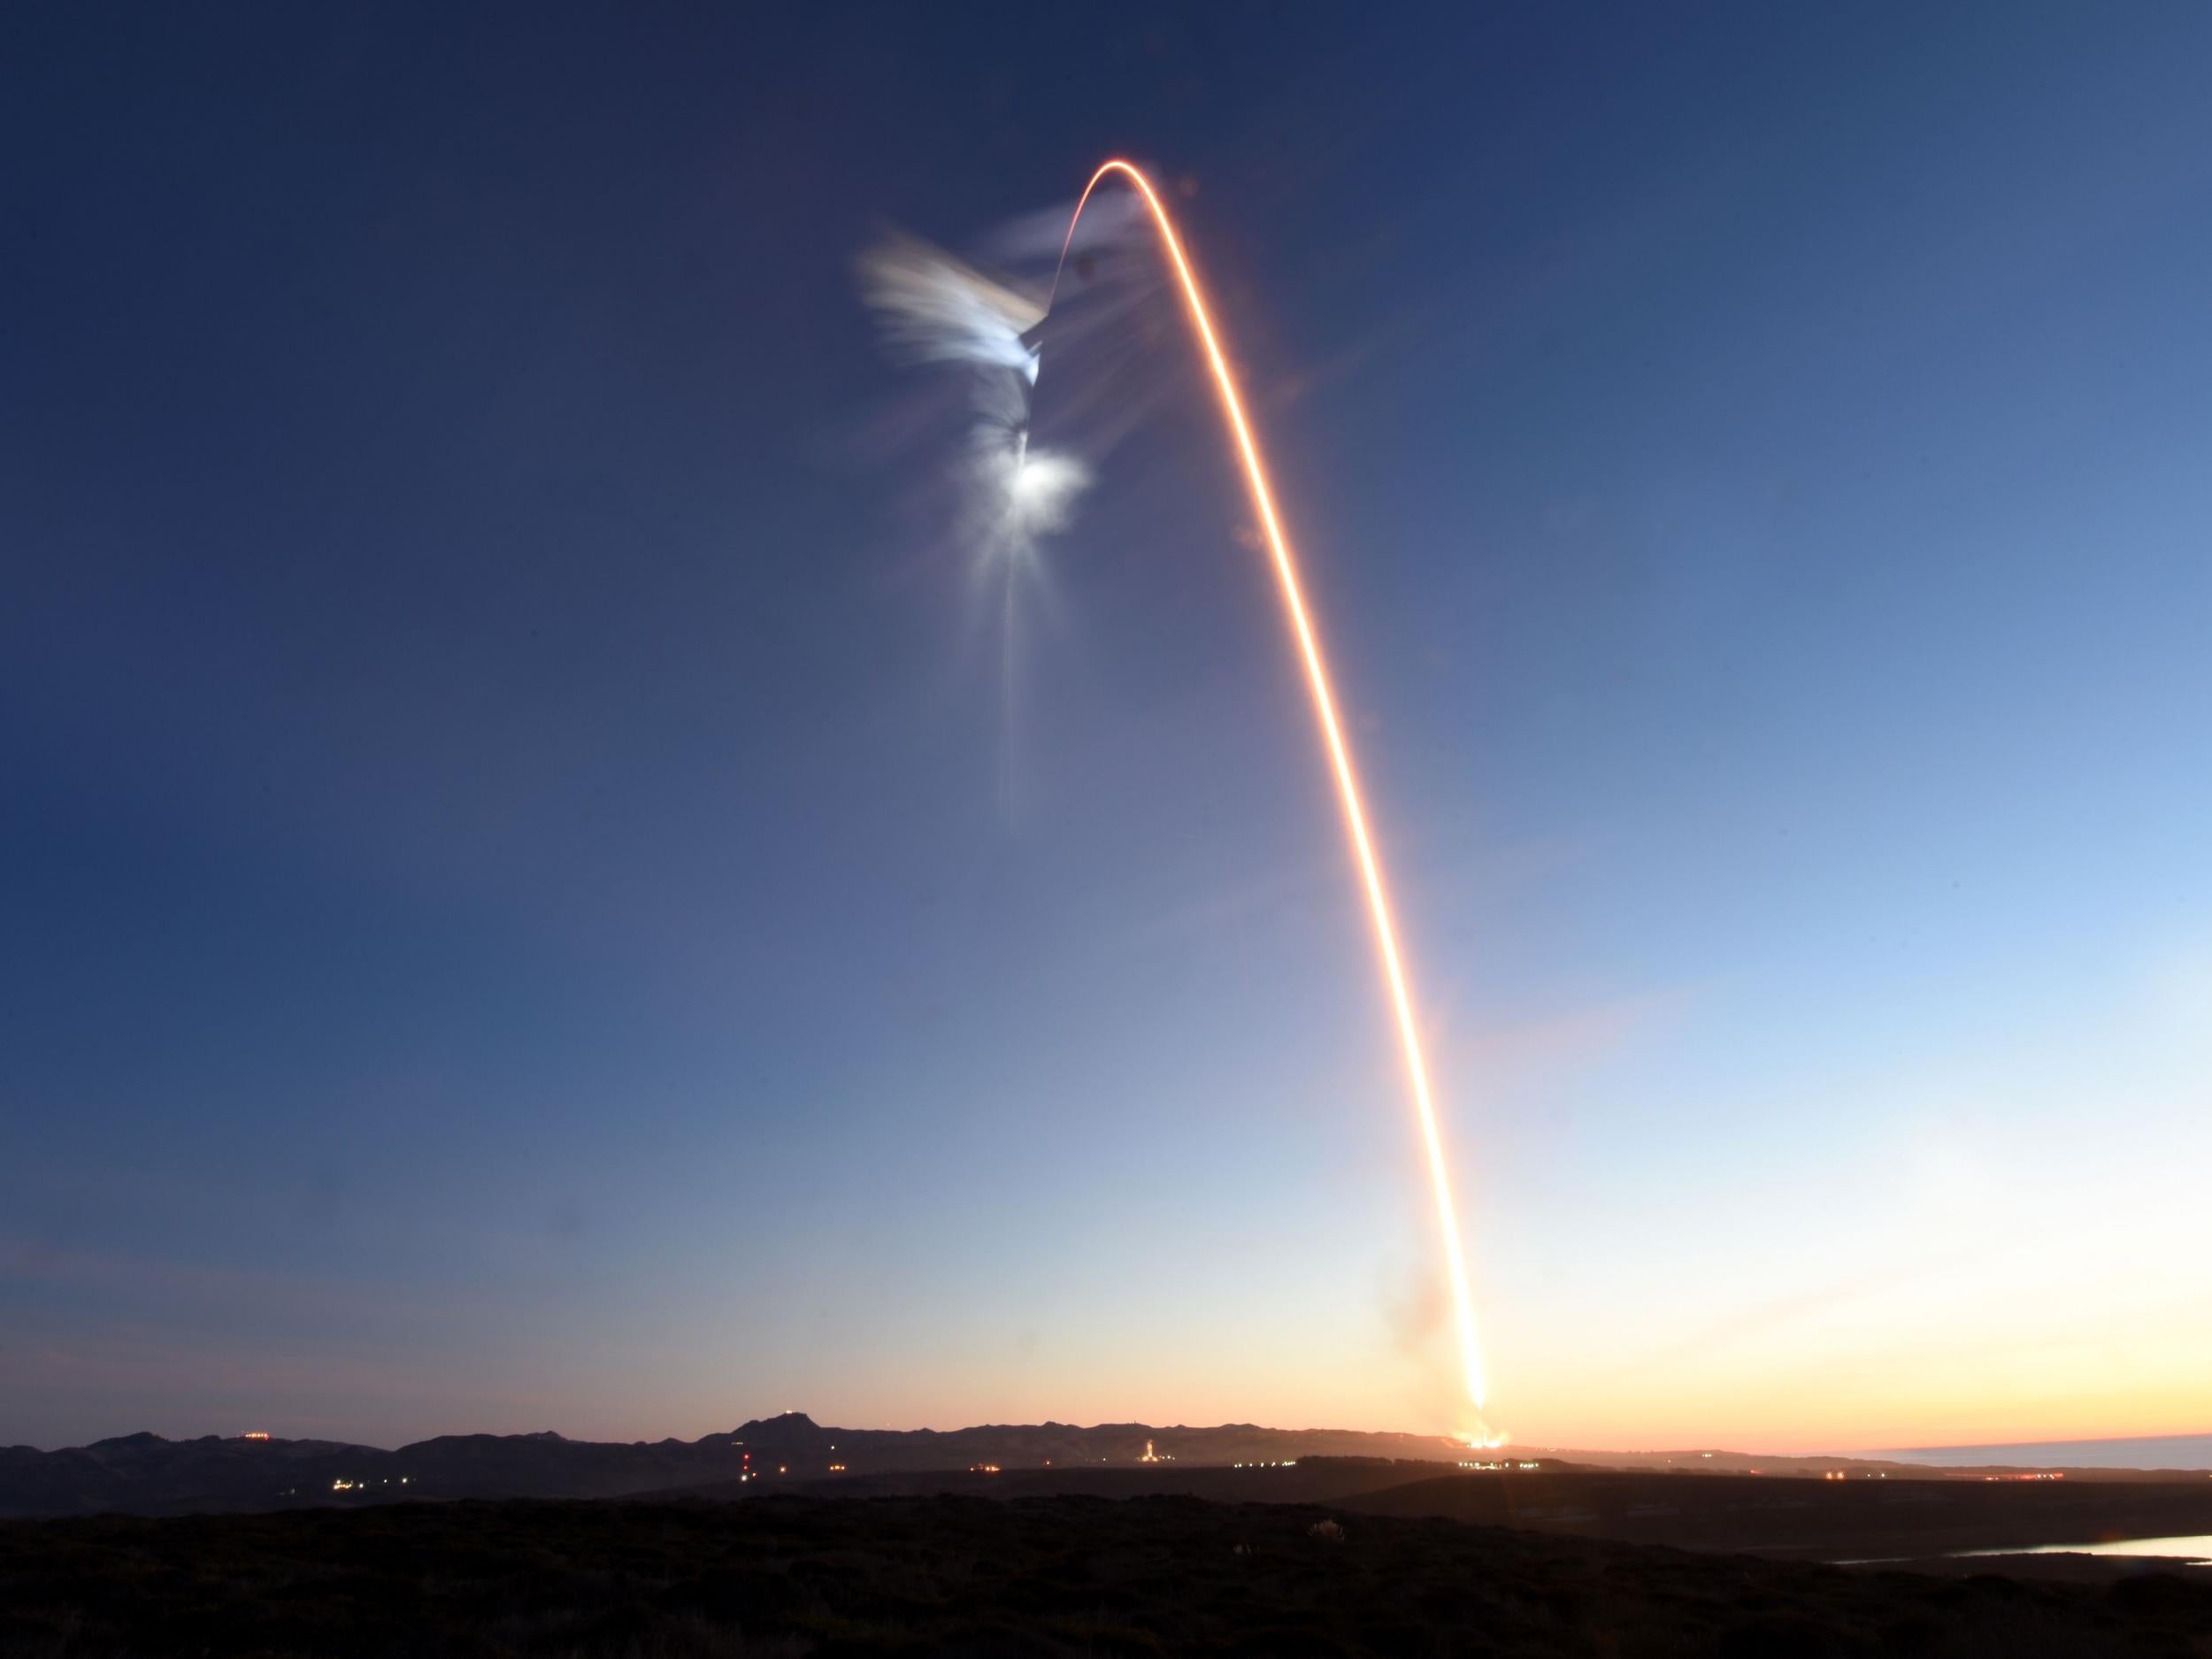 The SpaceX Falcon 9 rocket launches from the Space Launch Complex 4 at Vandenberg Air Force Base in Lompoc, California on December 22, 2017